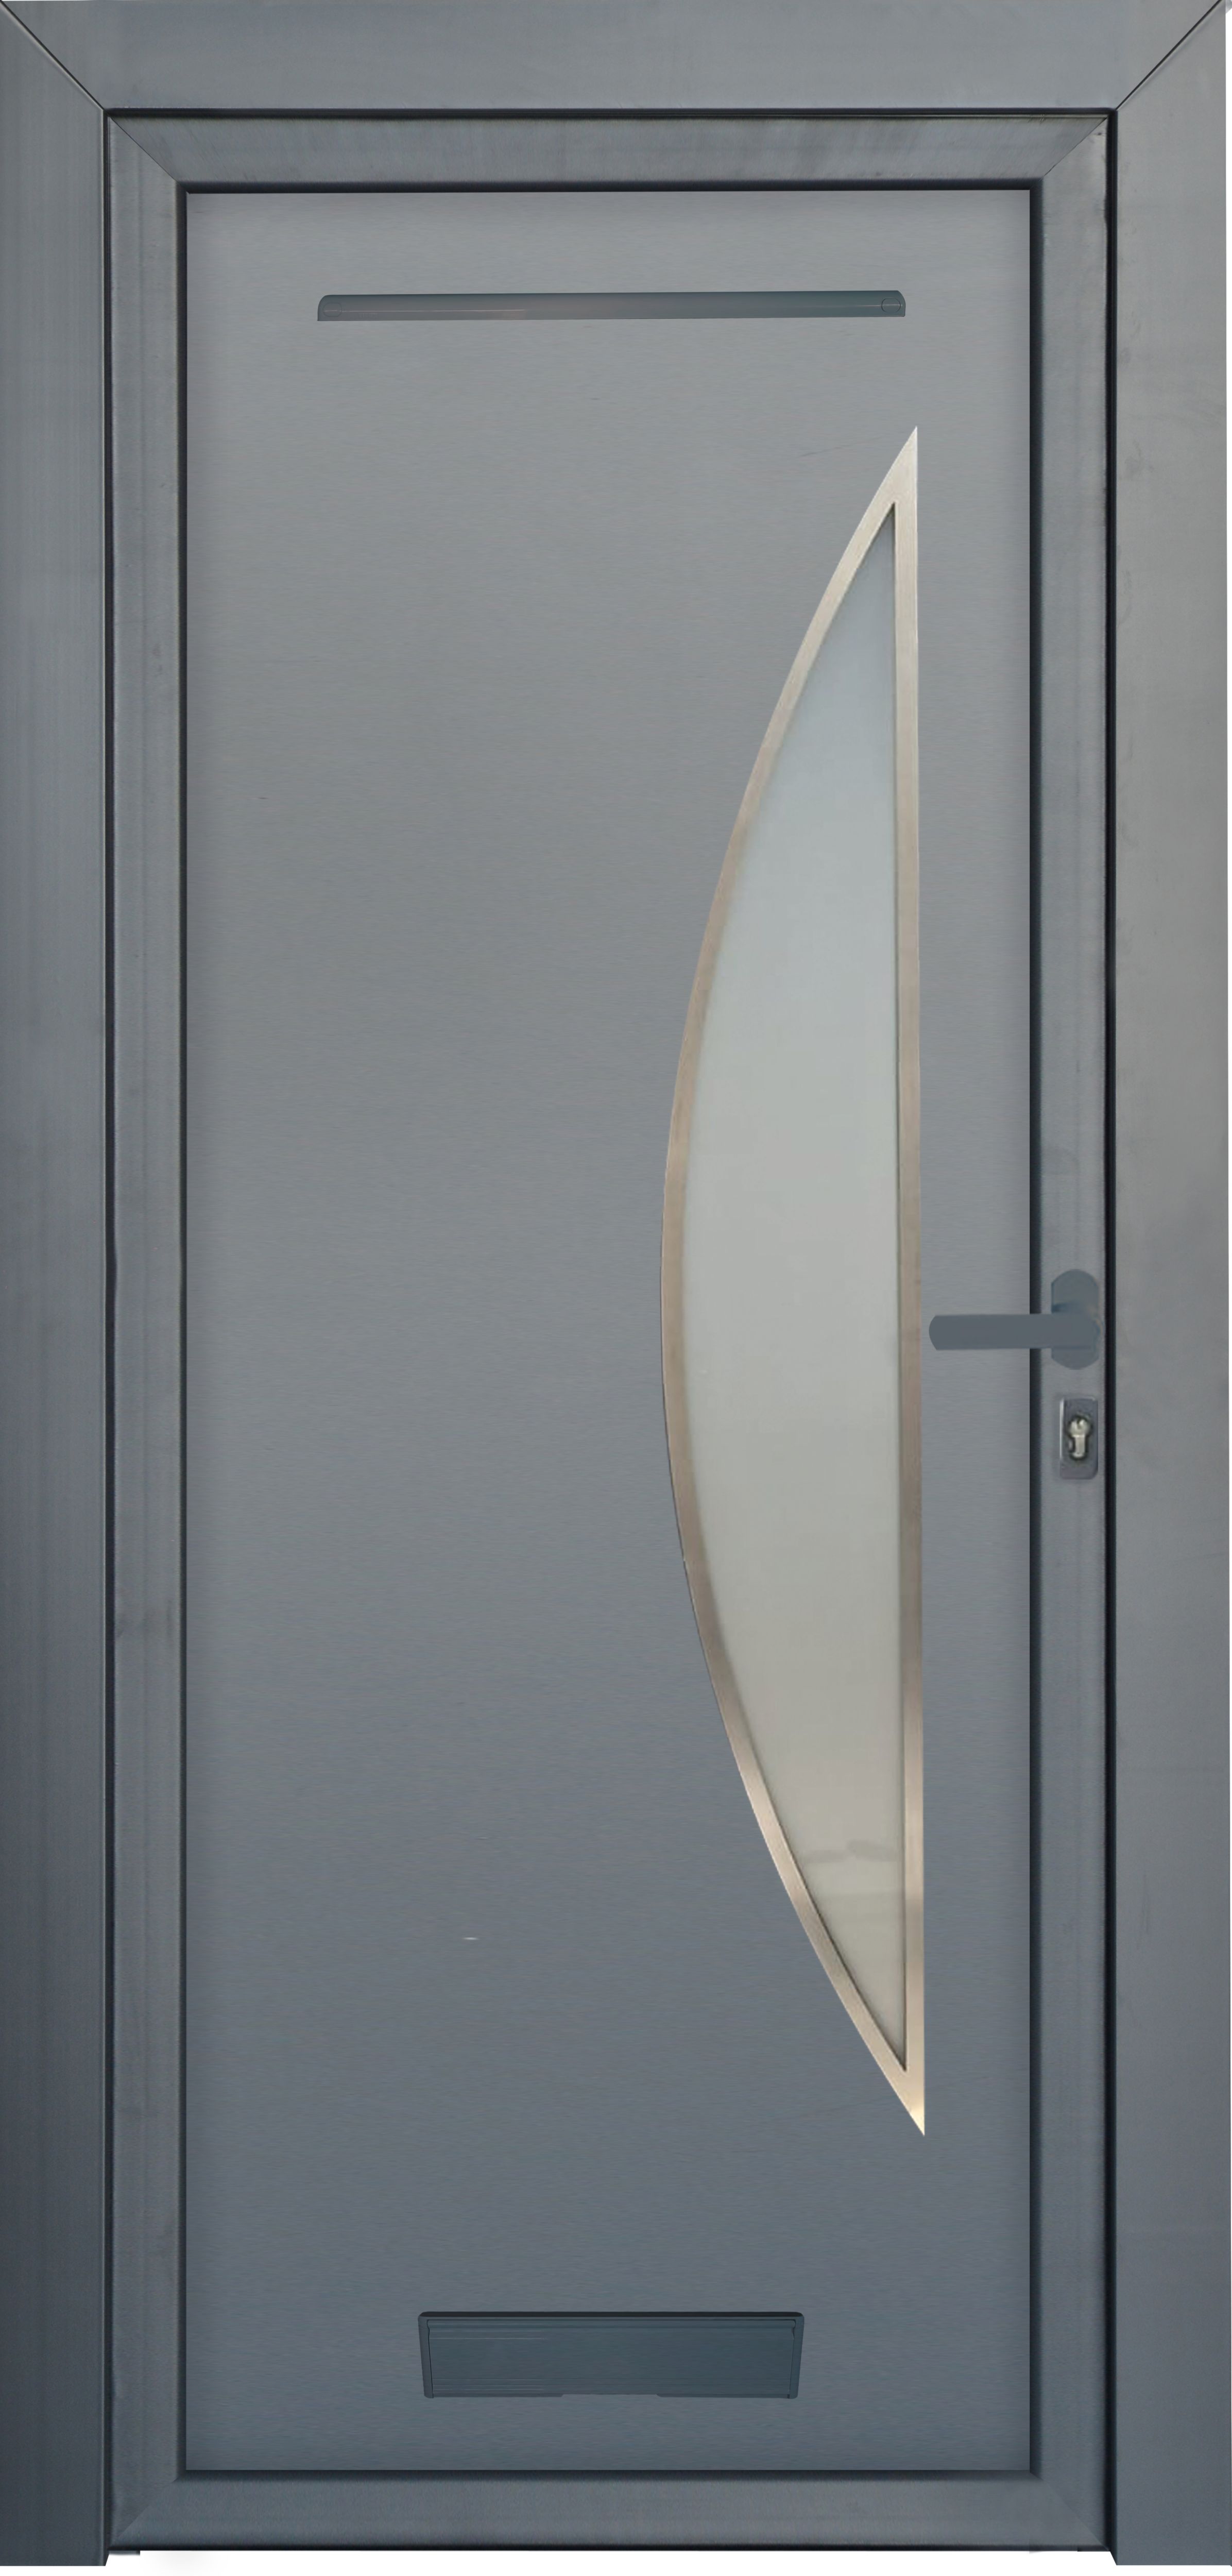 Fortia Hermoso Frosted Glazed Antracite LH External Front Door set, (H)2085mm (W)840mm